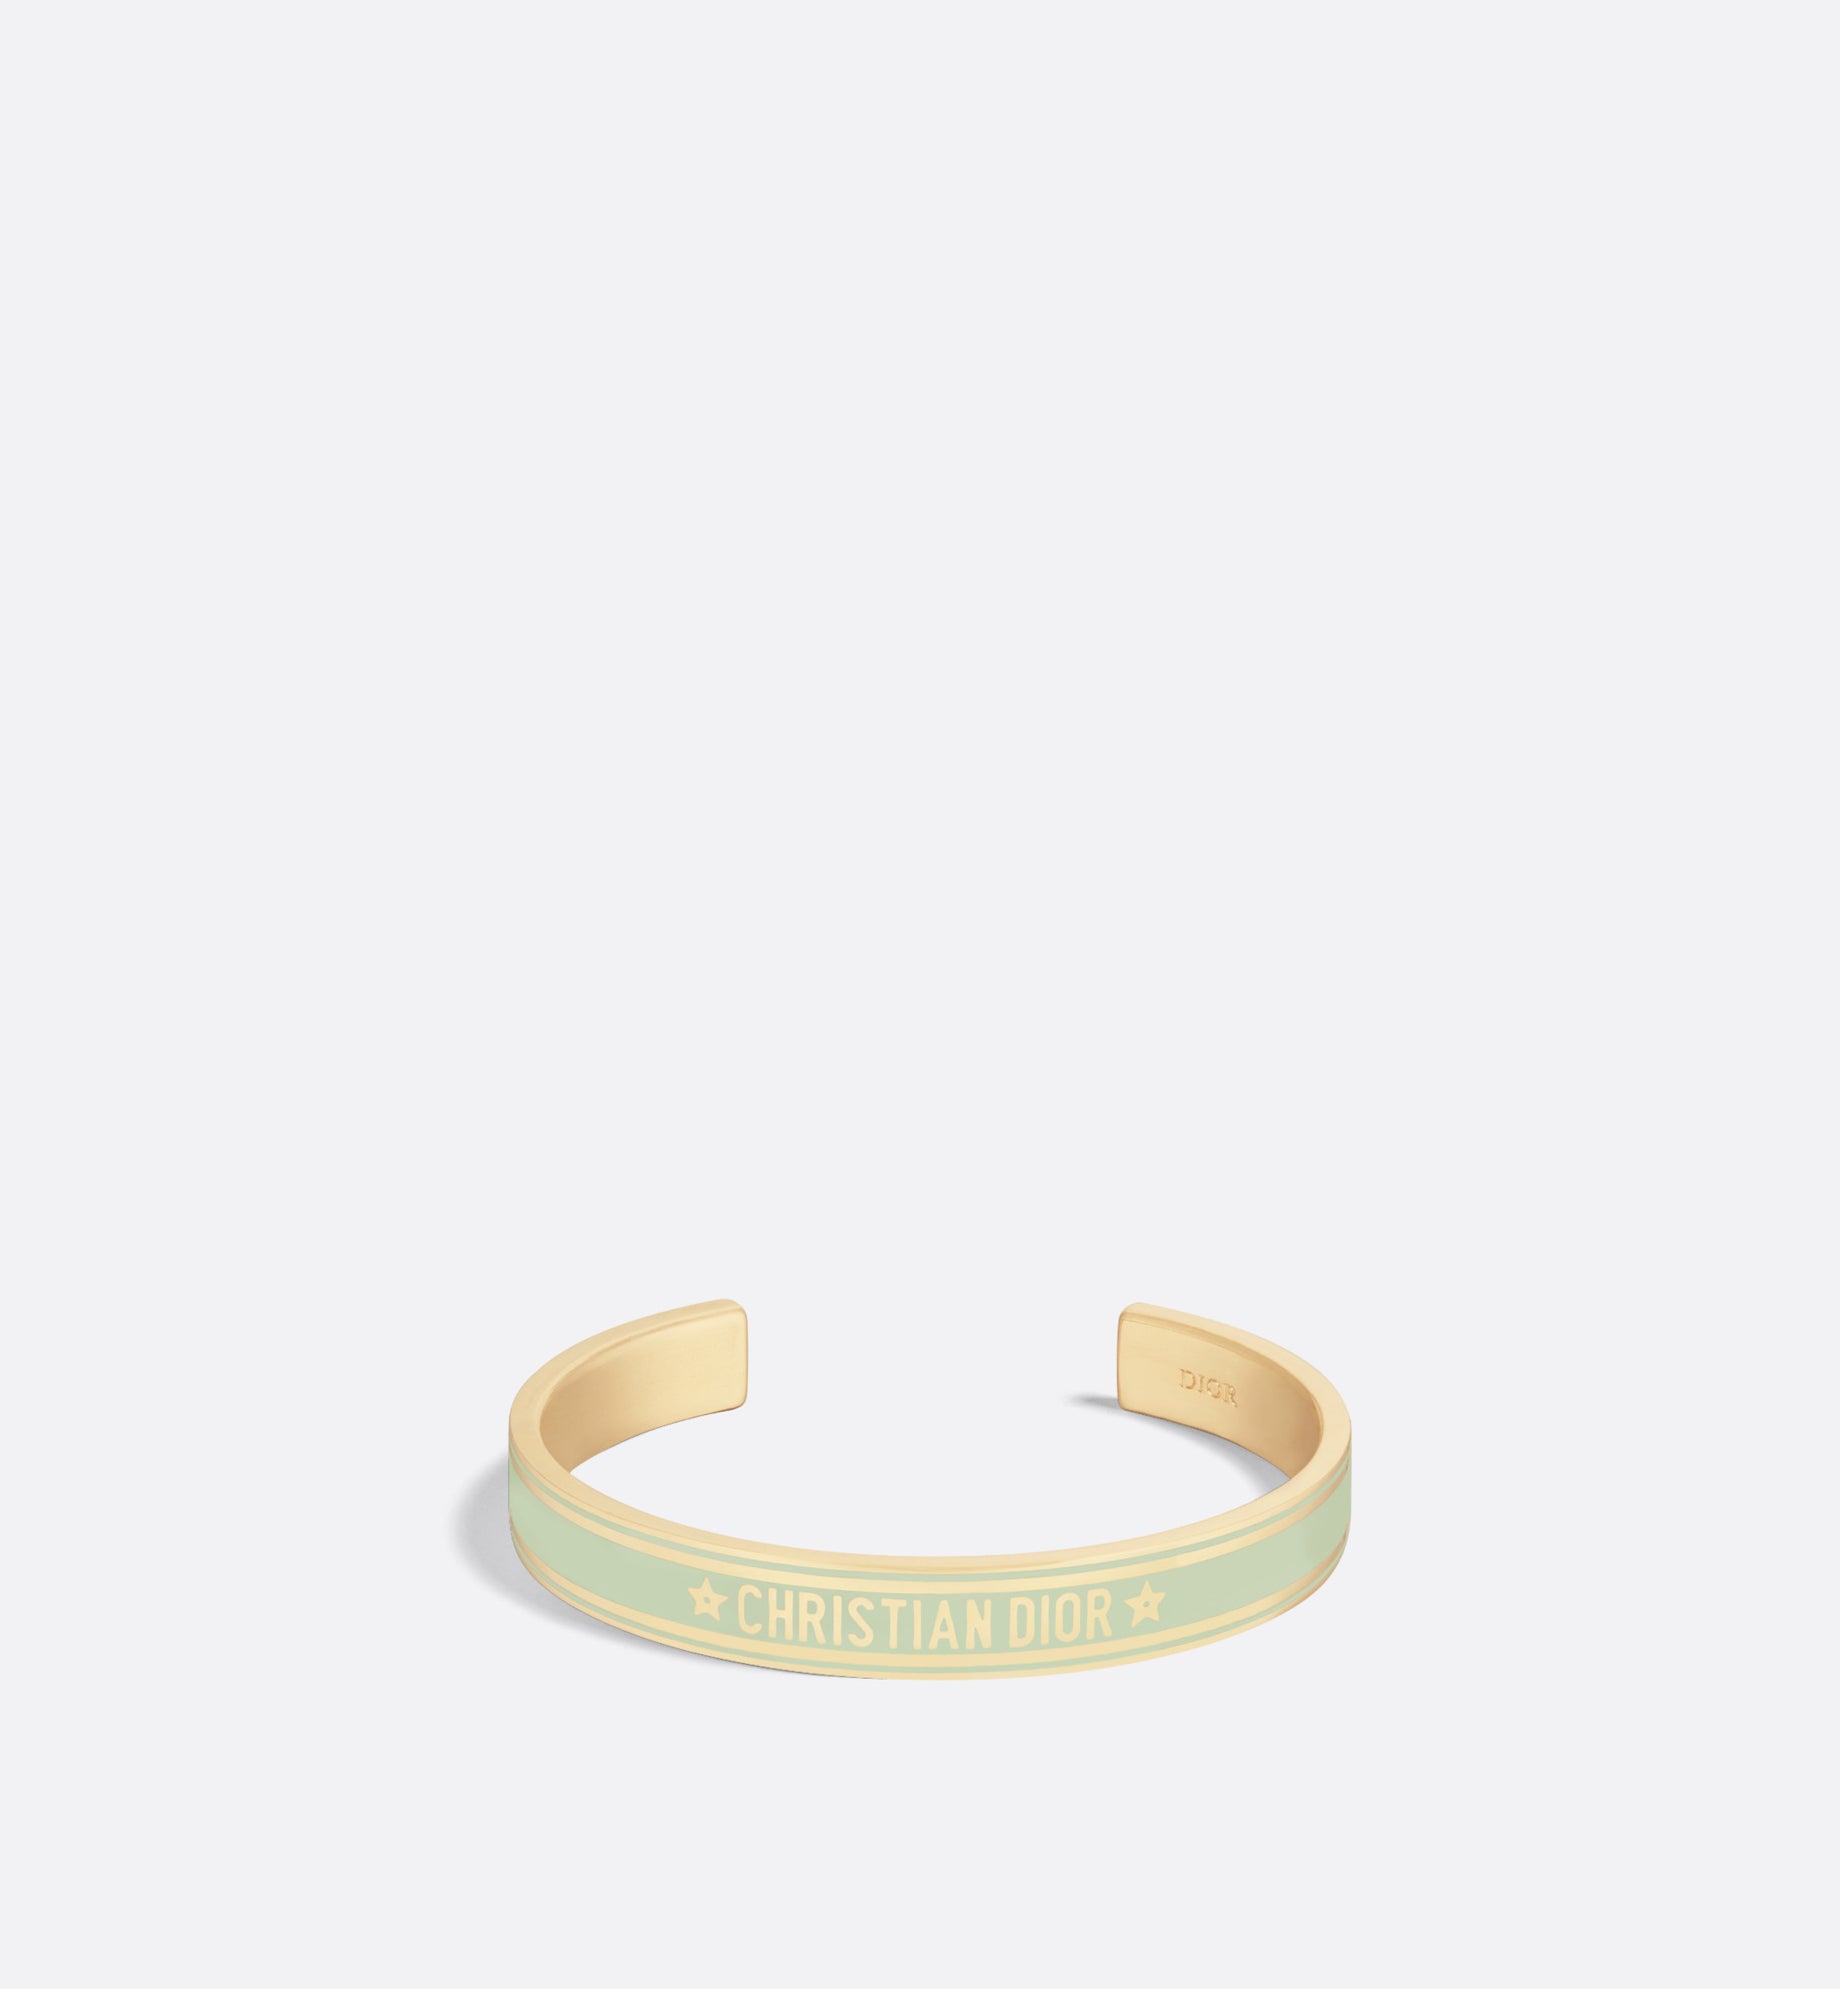 Dior Code Bangle • Gold-Finish Metal and Pastel Mint Lacquer